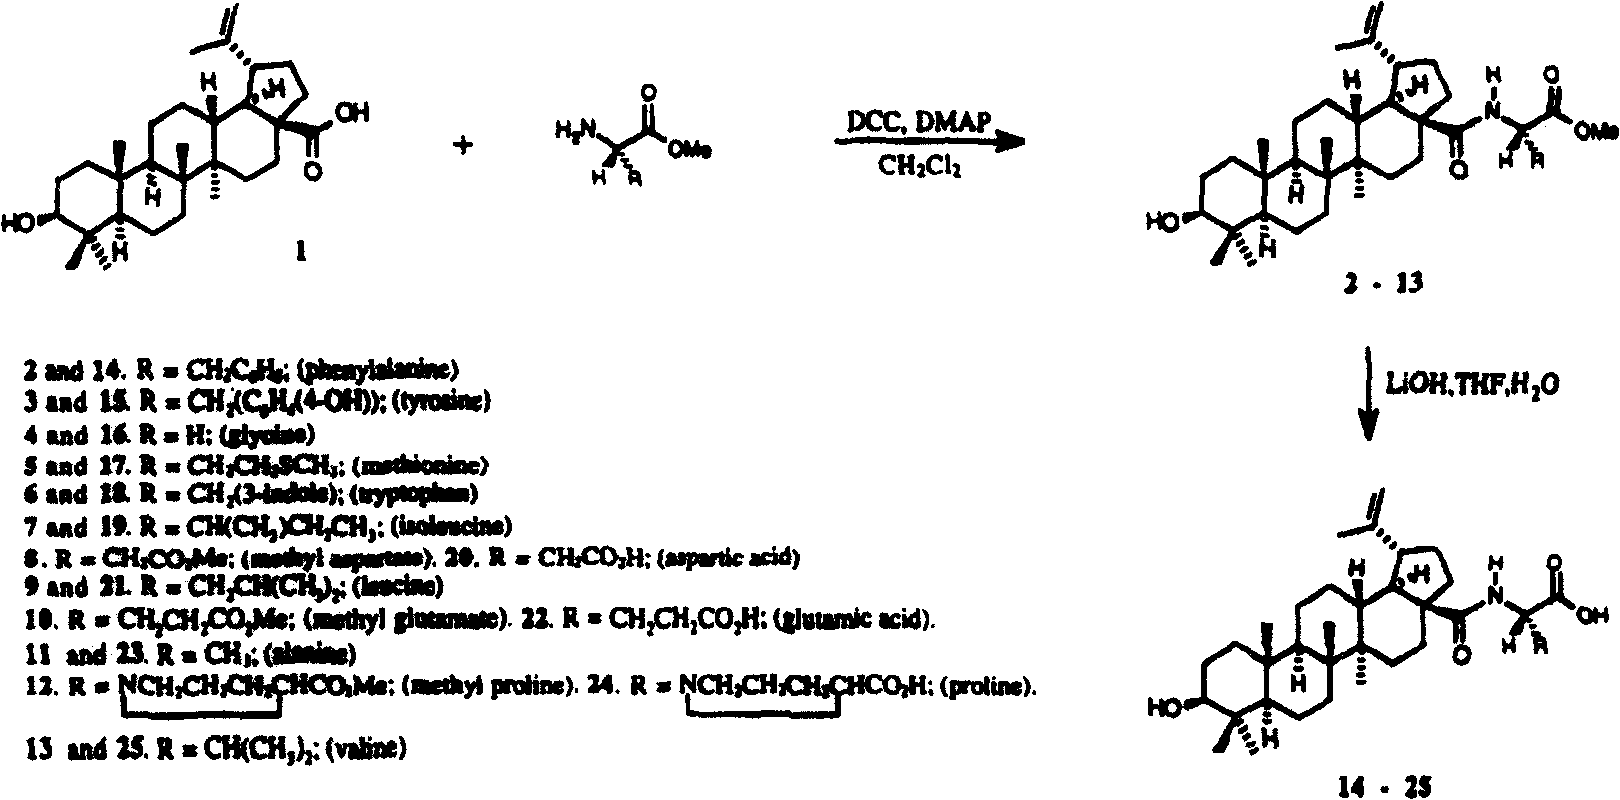 23-Hydroxyl betulinic acid kind derivant and preparing process, preparation and use thereof